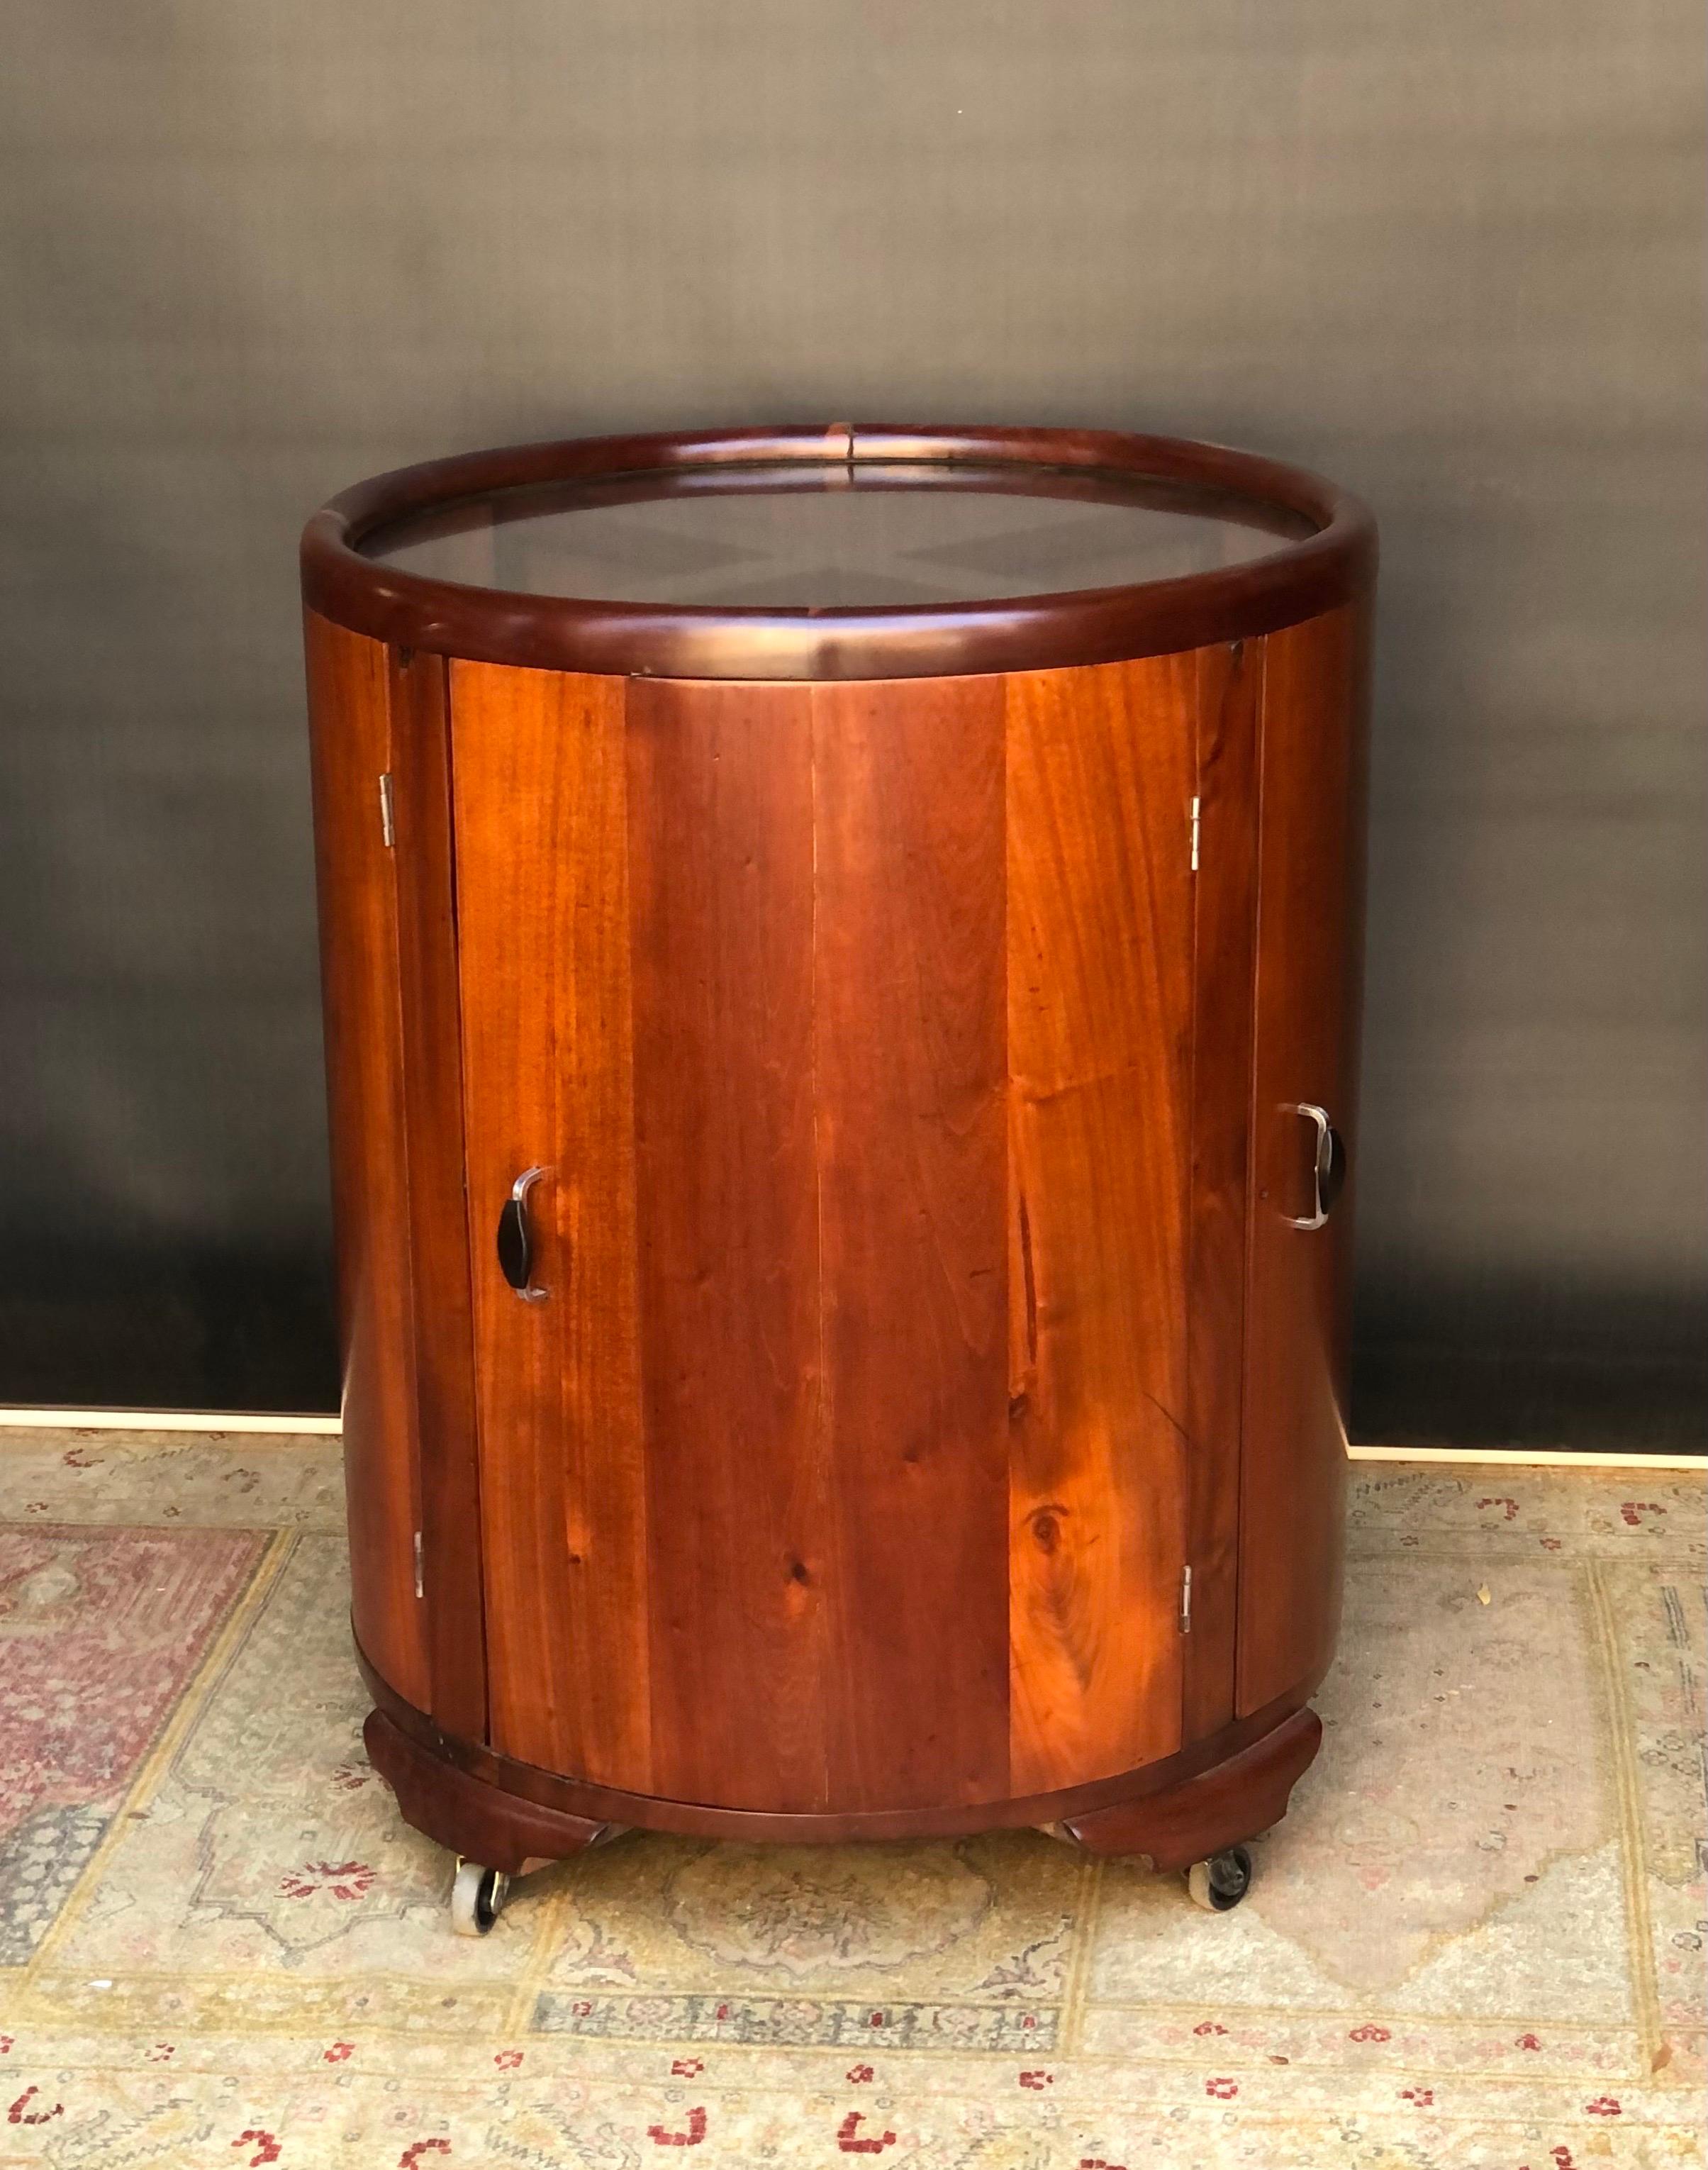 Jamaican Art Deco Round Bar/Cocktail Cabinet By Burnett Webster(circa.1934-1939) In Good Condition For Sale In Charleston, SC